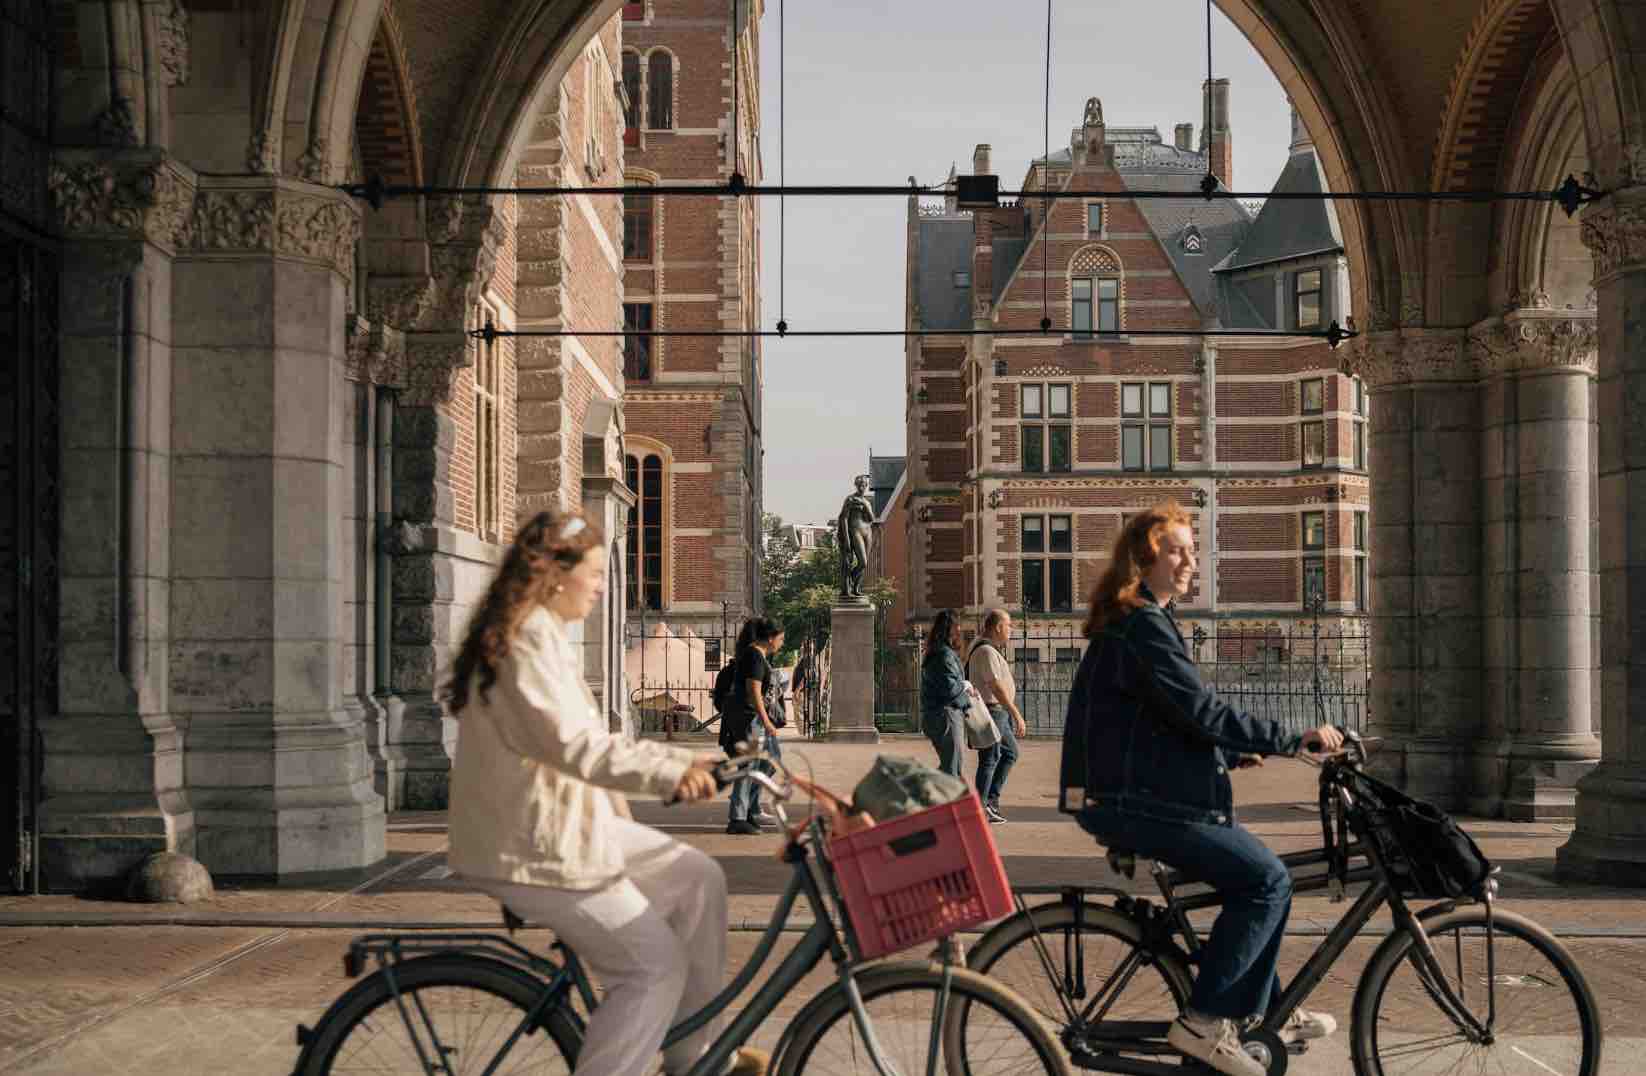 Spring into Action: Top Outdoor Activities to Enjoy in Amsterdam as the Weather Warms Up